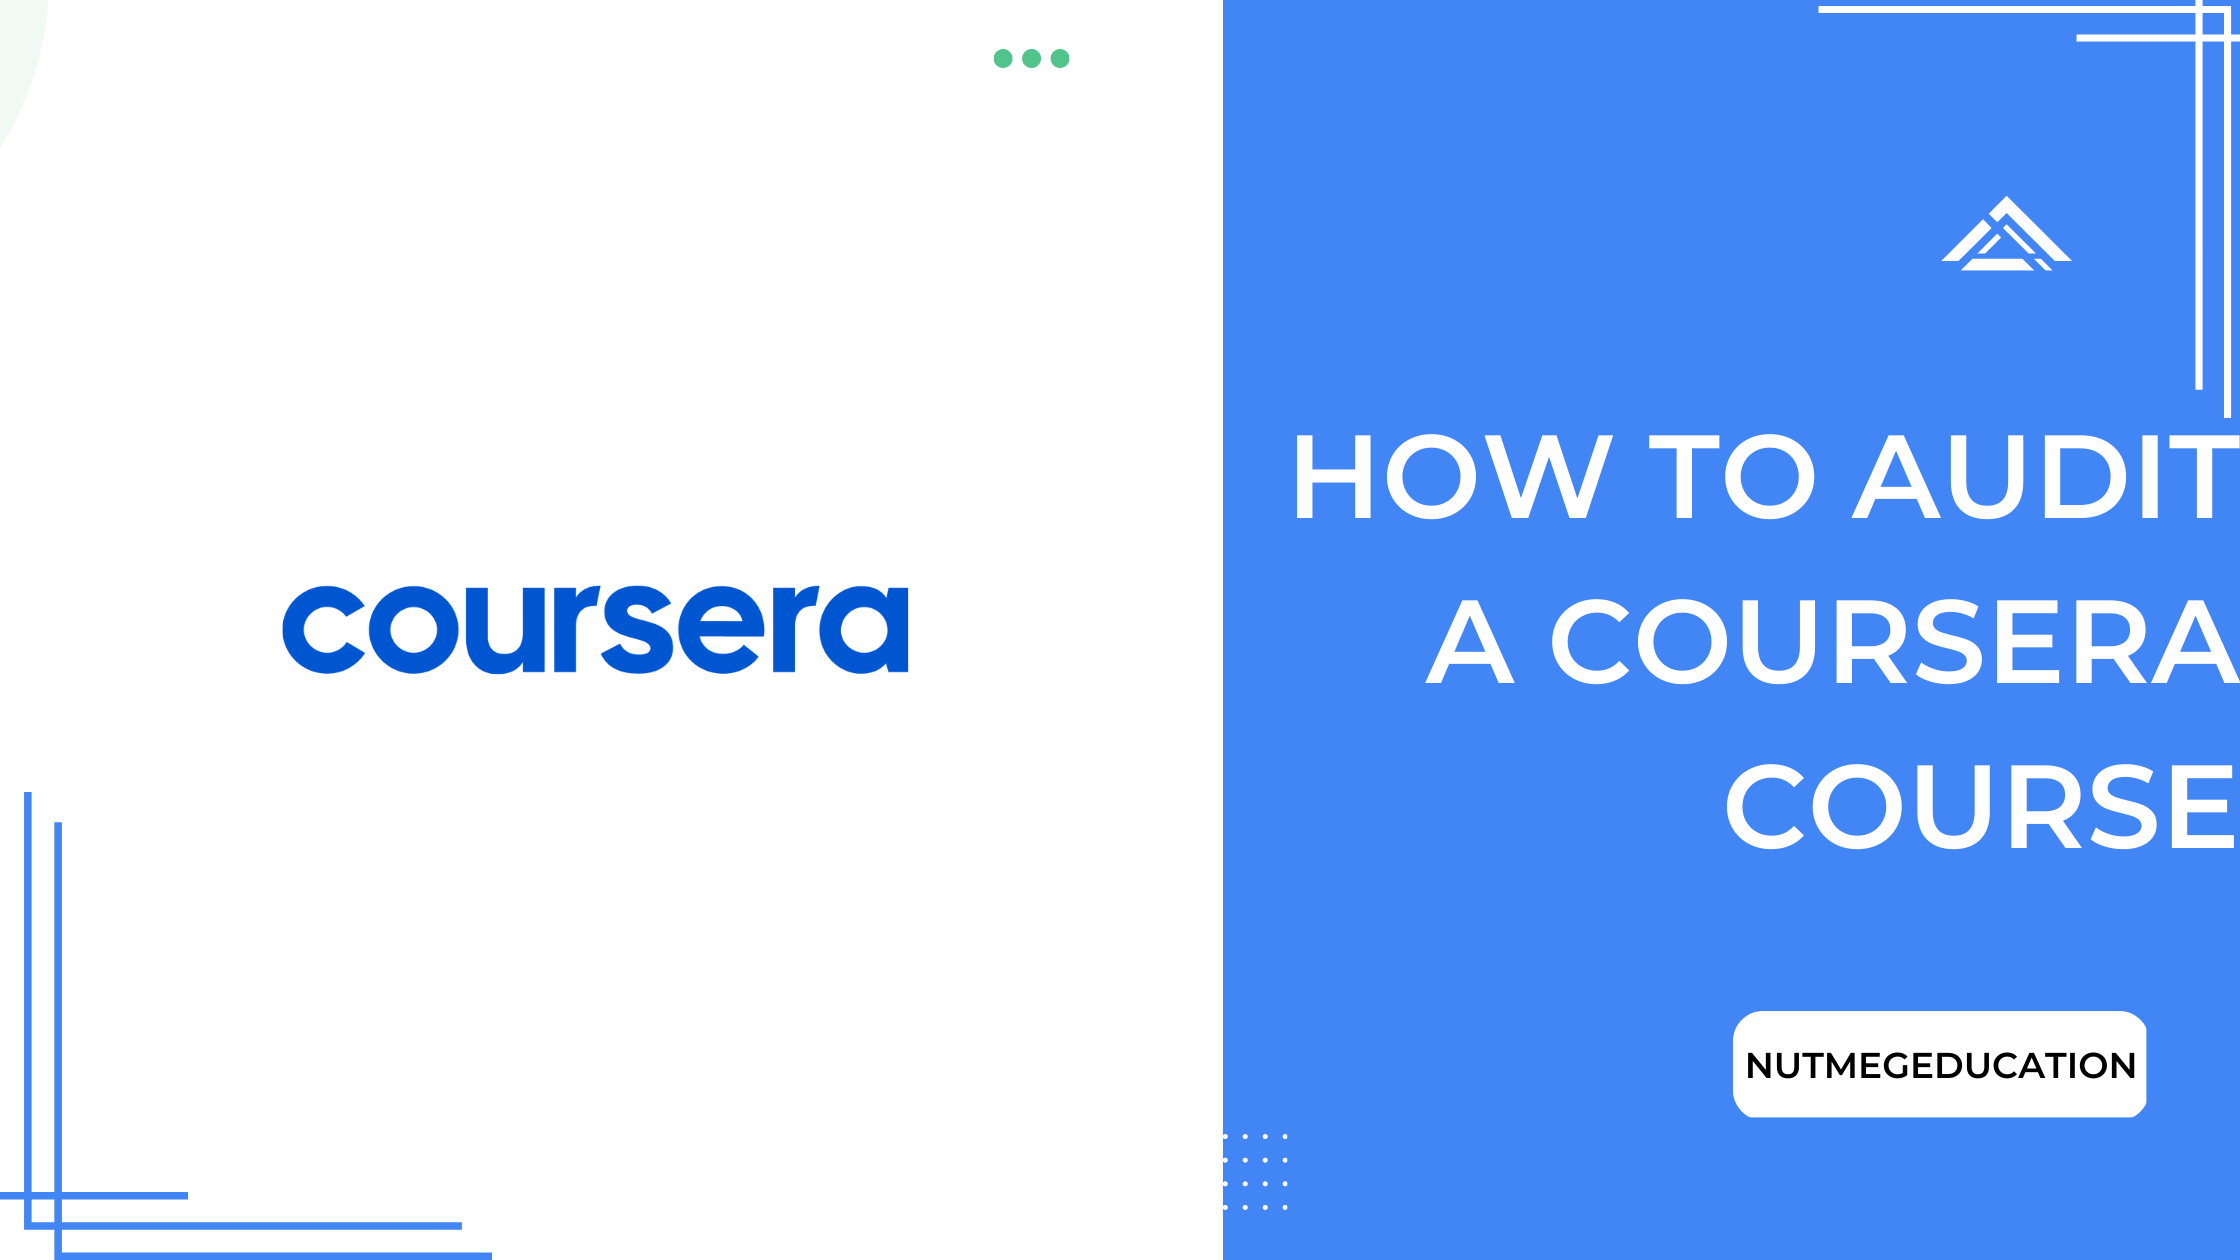 How To Audit A Coursera Course - NutMegEducation